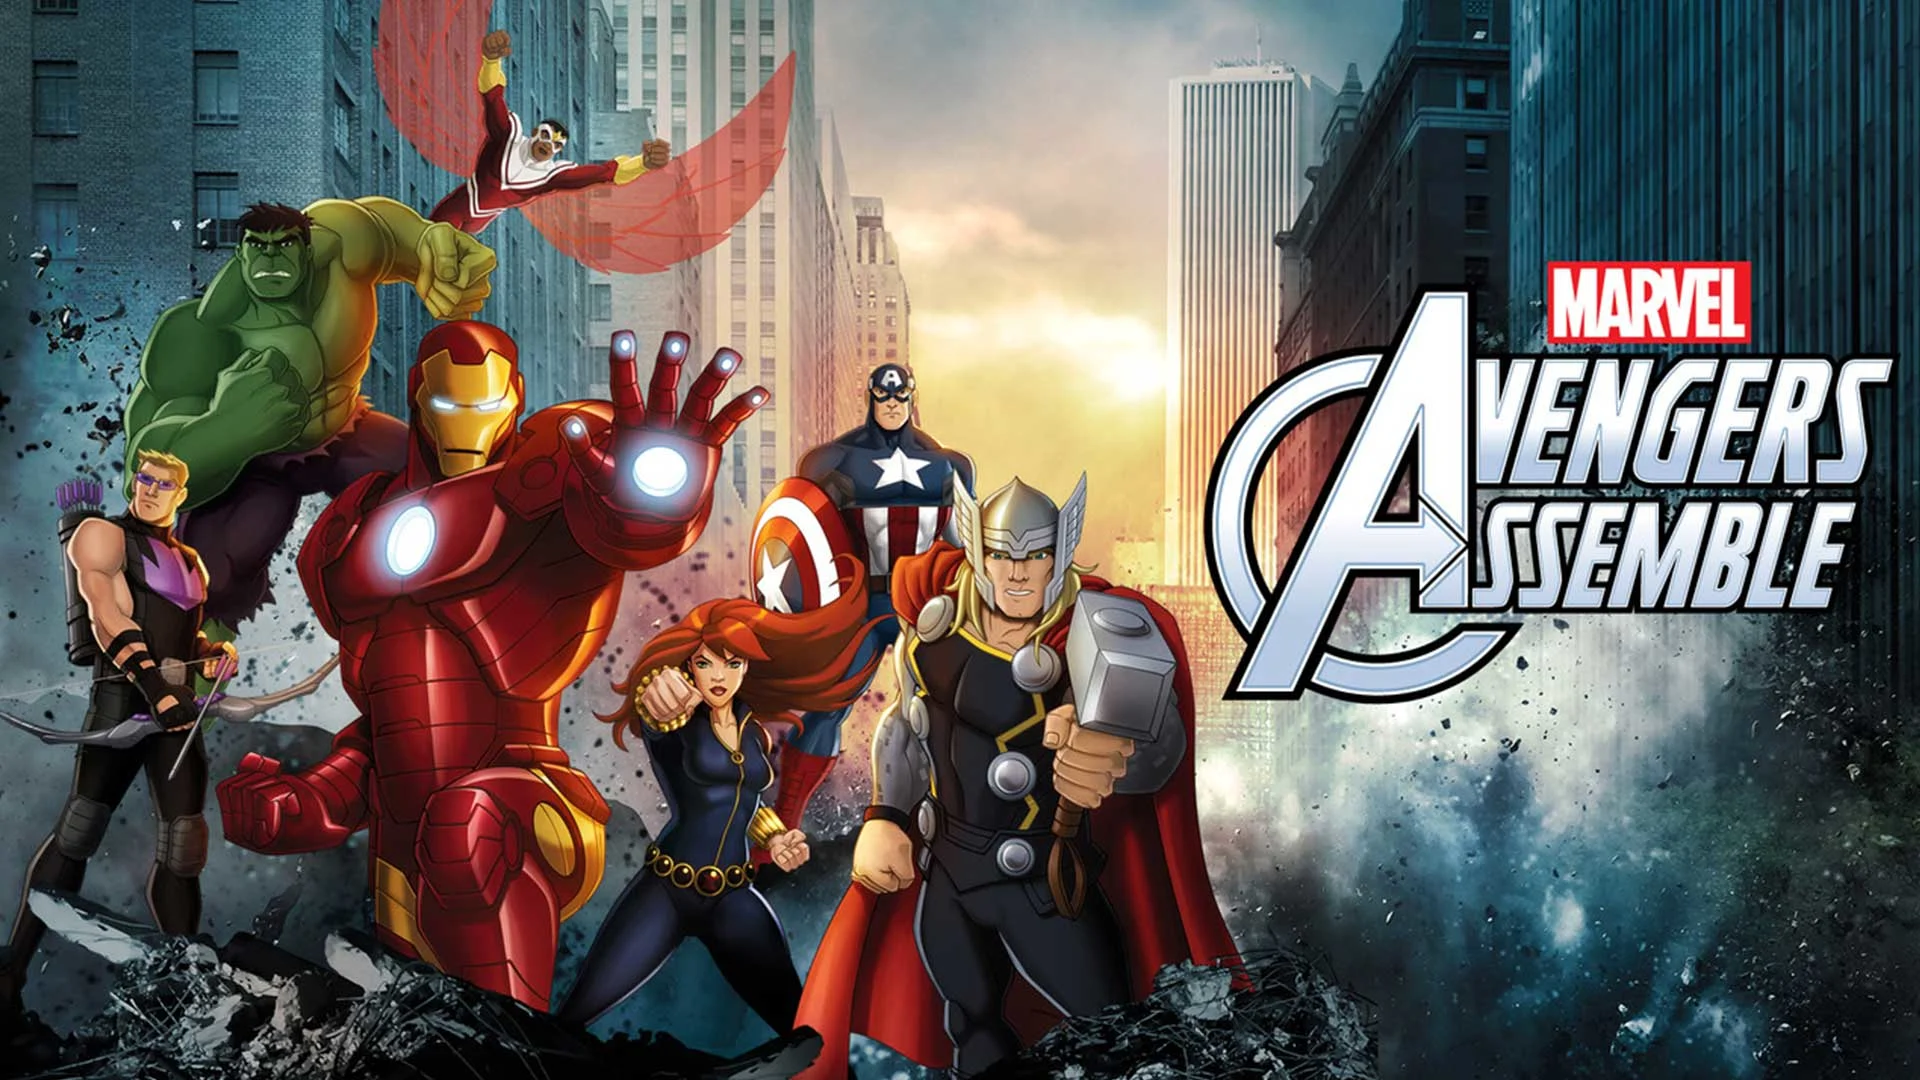 Avengers Assemble All Seasons All Episodes Download In Hindi In [480P, 720P, 1080P]